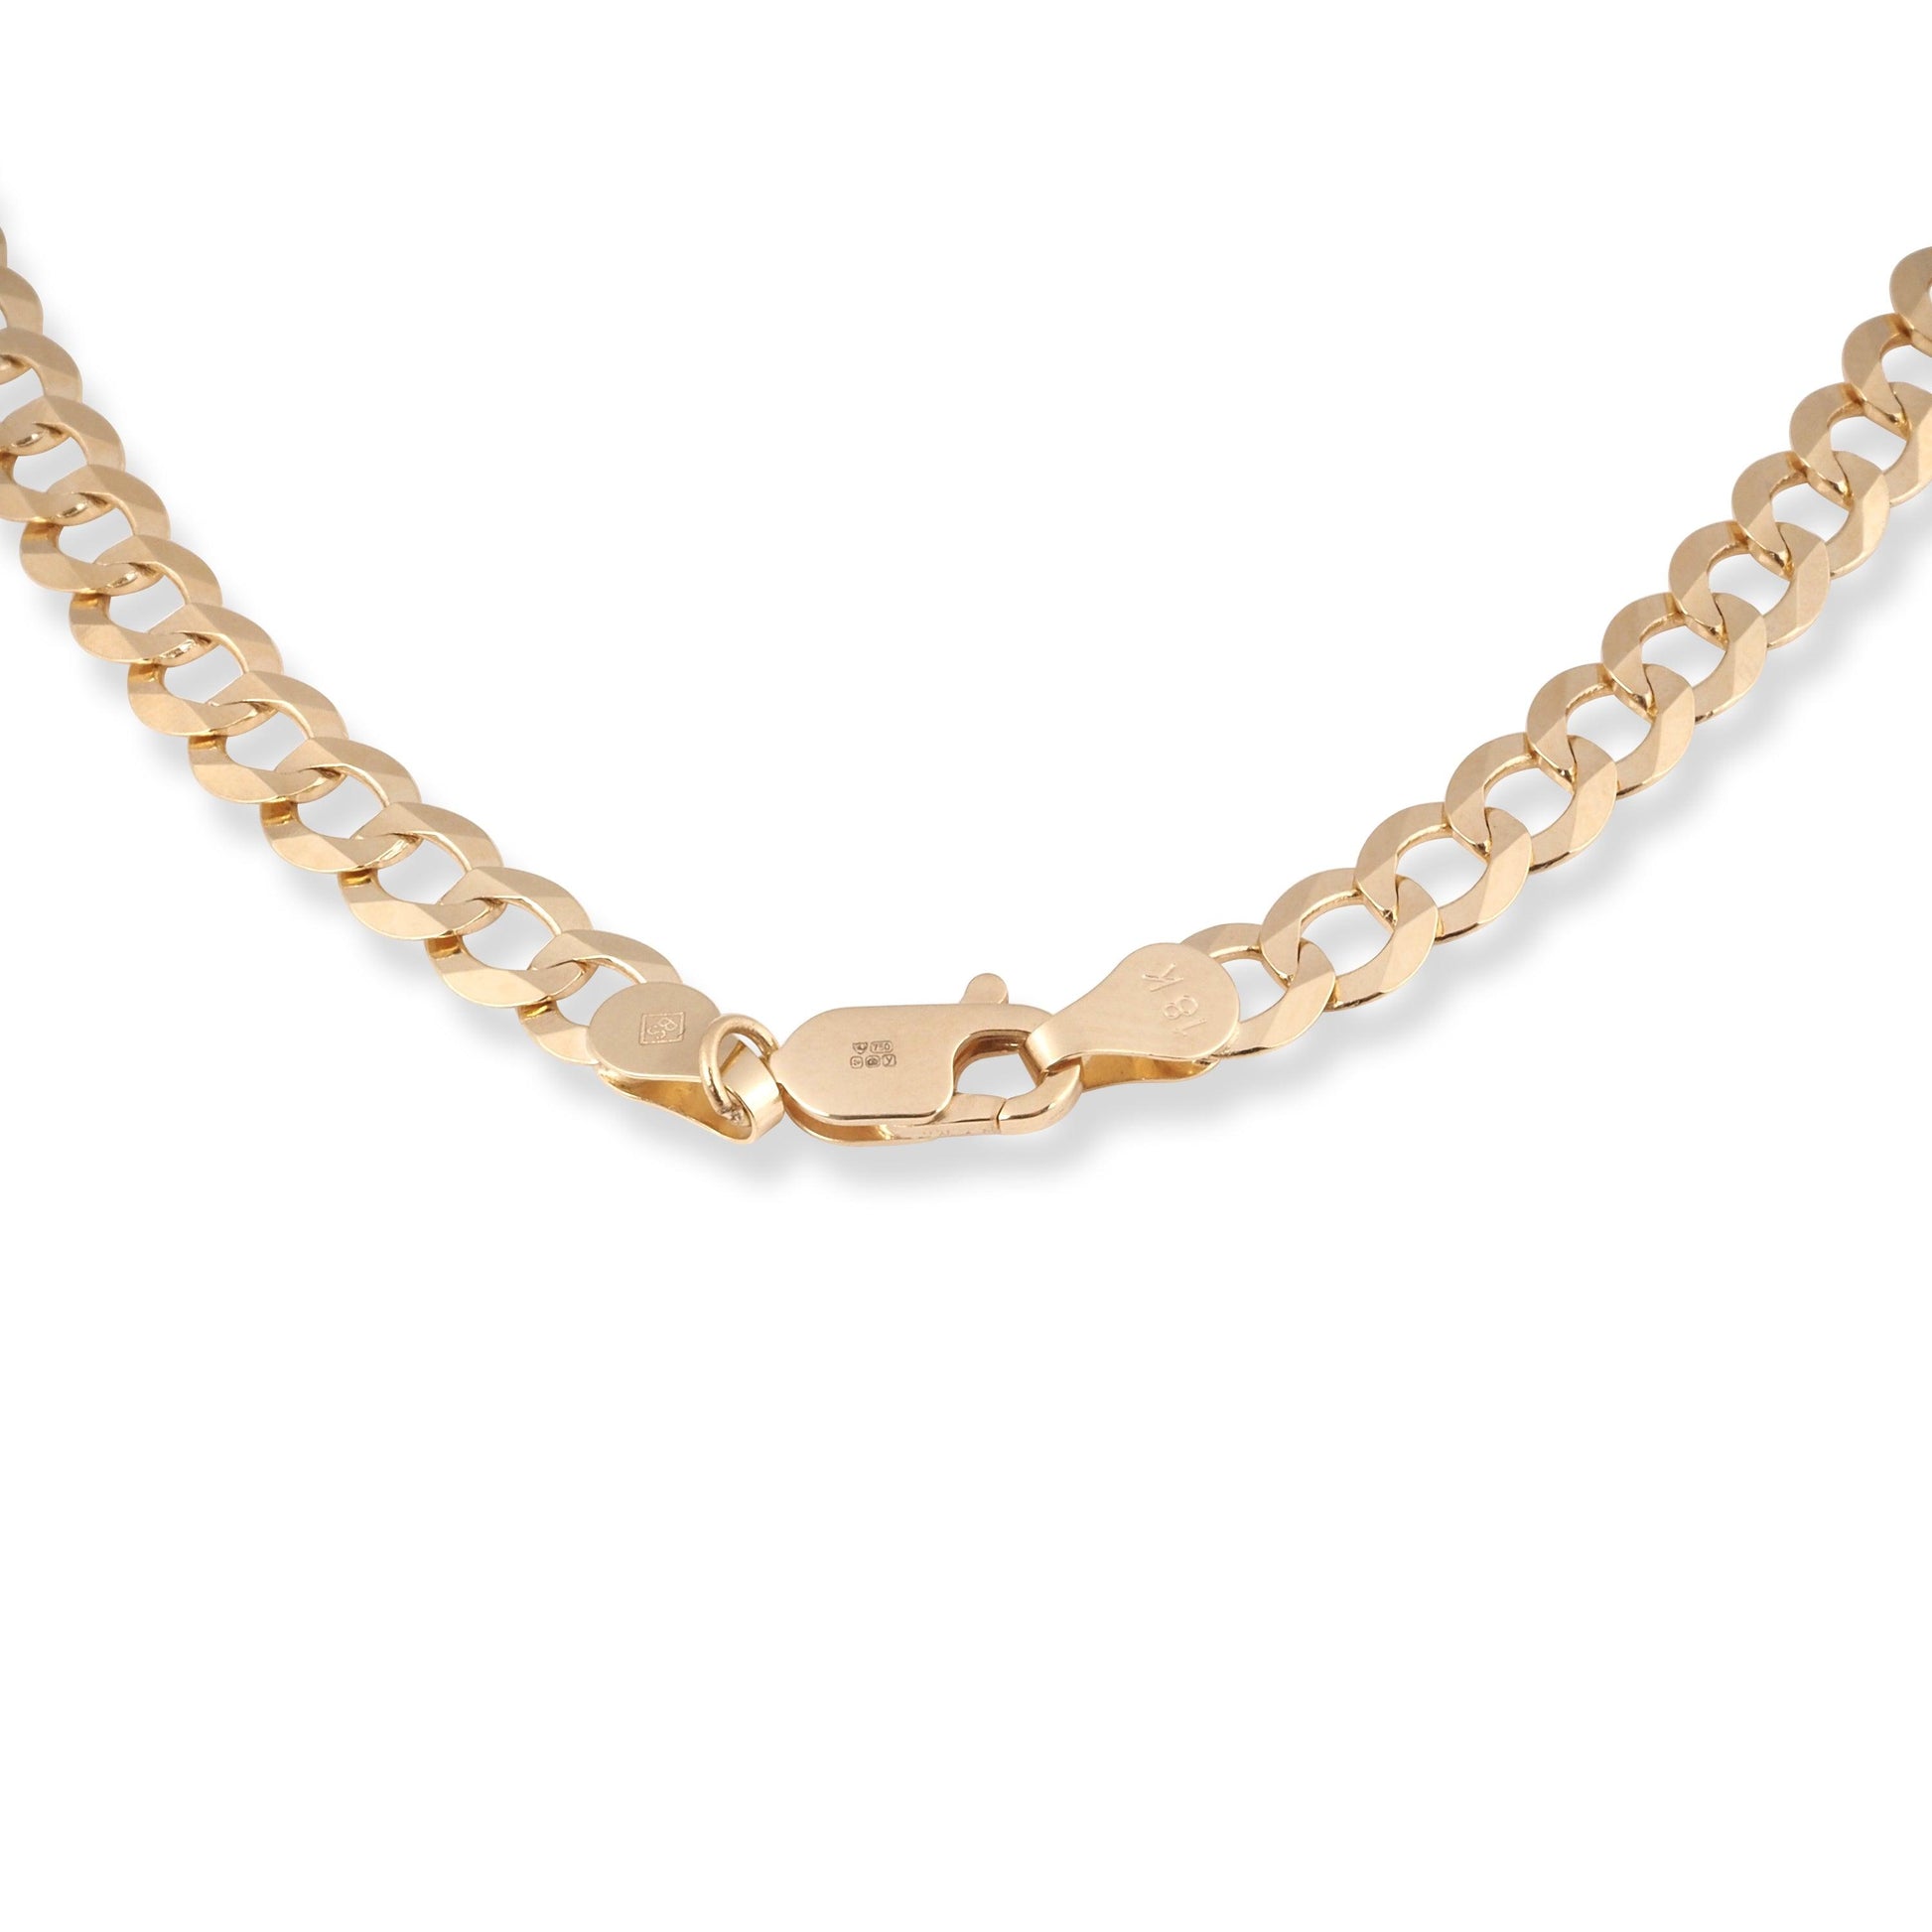 18ct Yellow Gold Curb Link Chain with Lobster Clasp C-3813 - Minar Jewellers